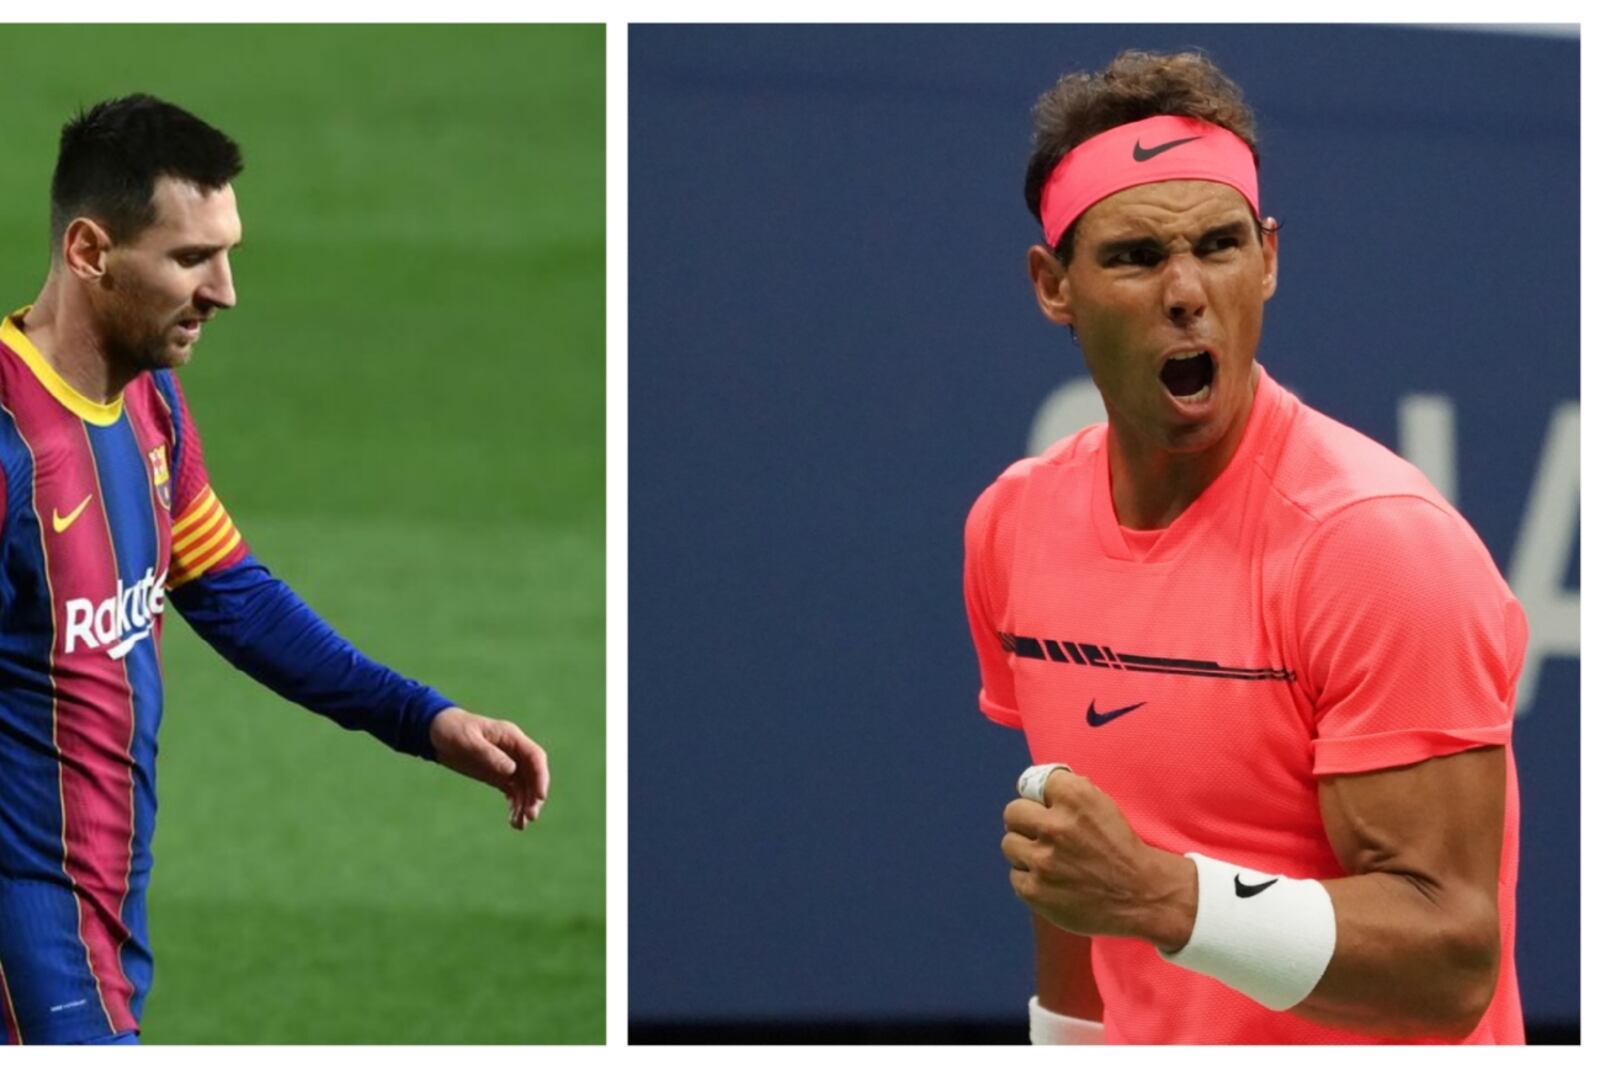 While Messi has a fortune of 600 million, the money that Rafa Nadal has earned